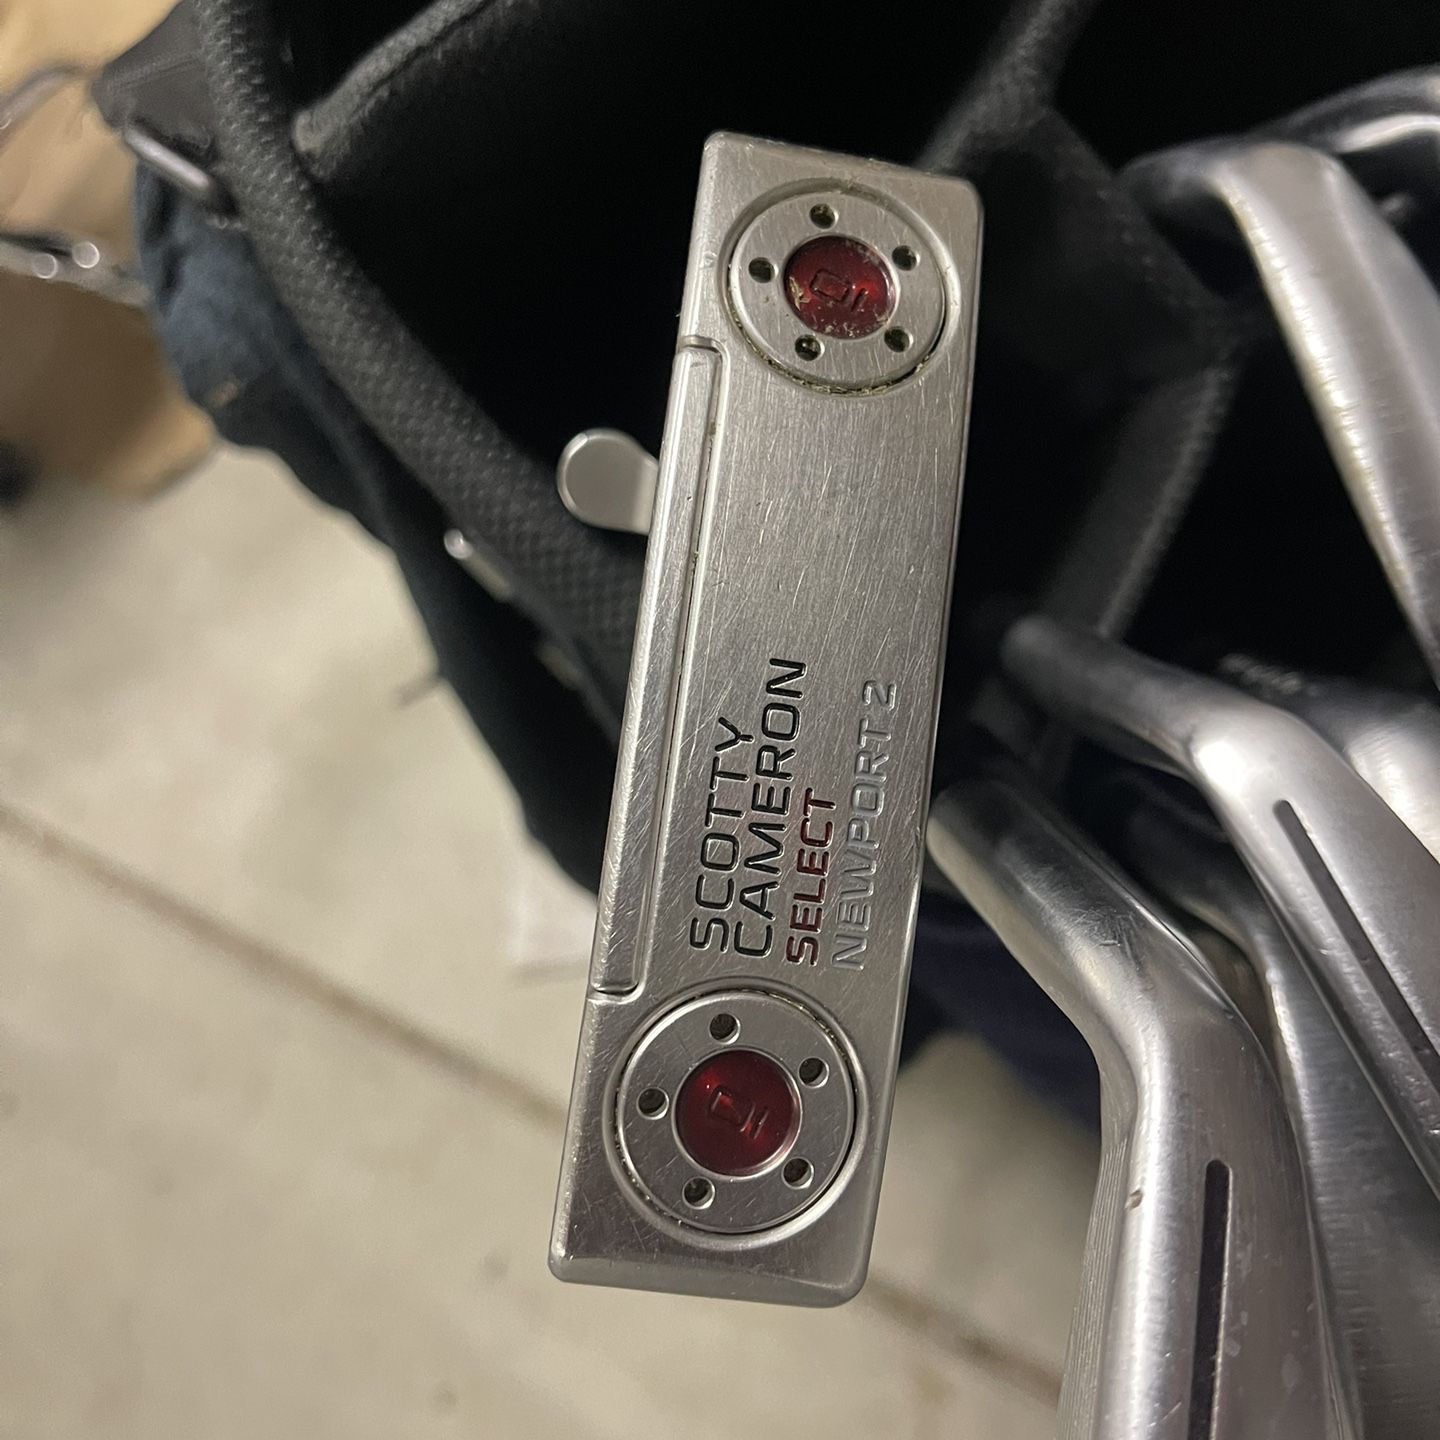 TaylorMade Golf Clubs And Titleist Putter (Scotty Cameron)